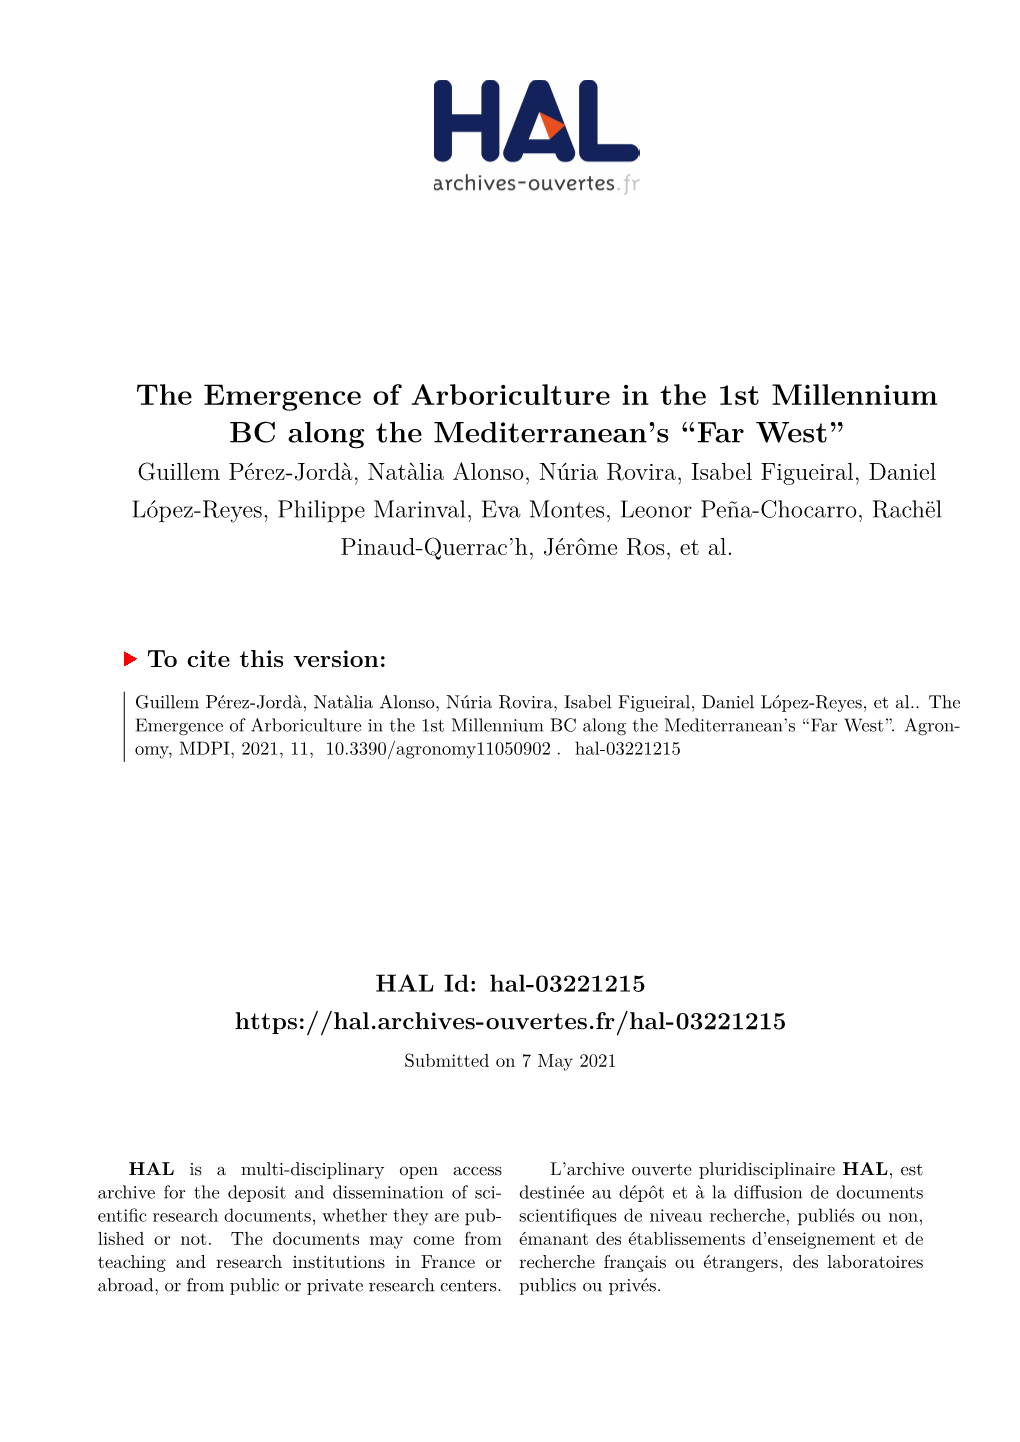 The Emergence of Arboriculture in the 1St Millennium BC Along the Mediterranean's